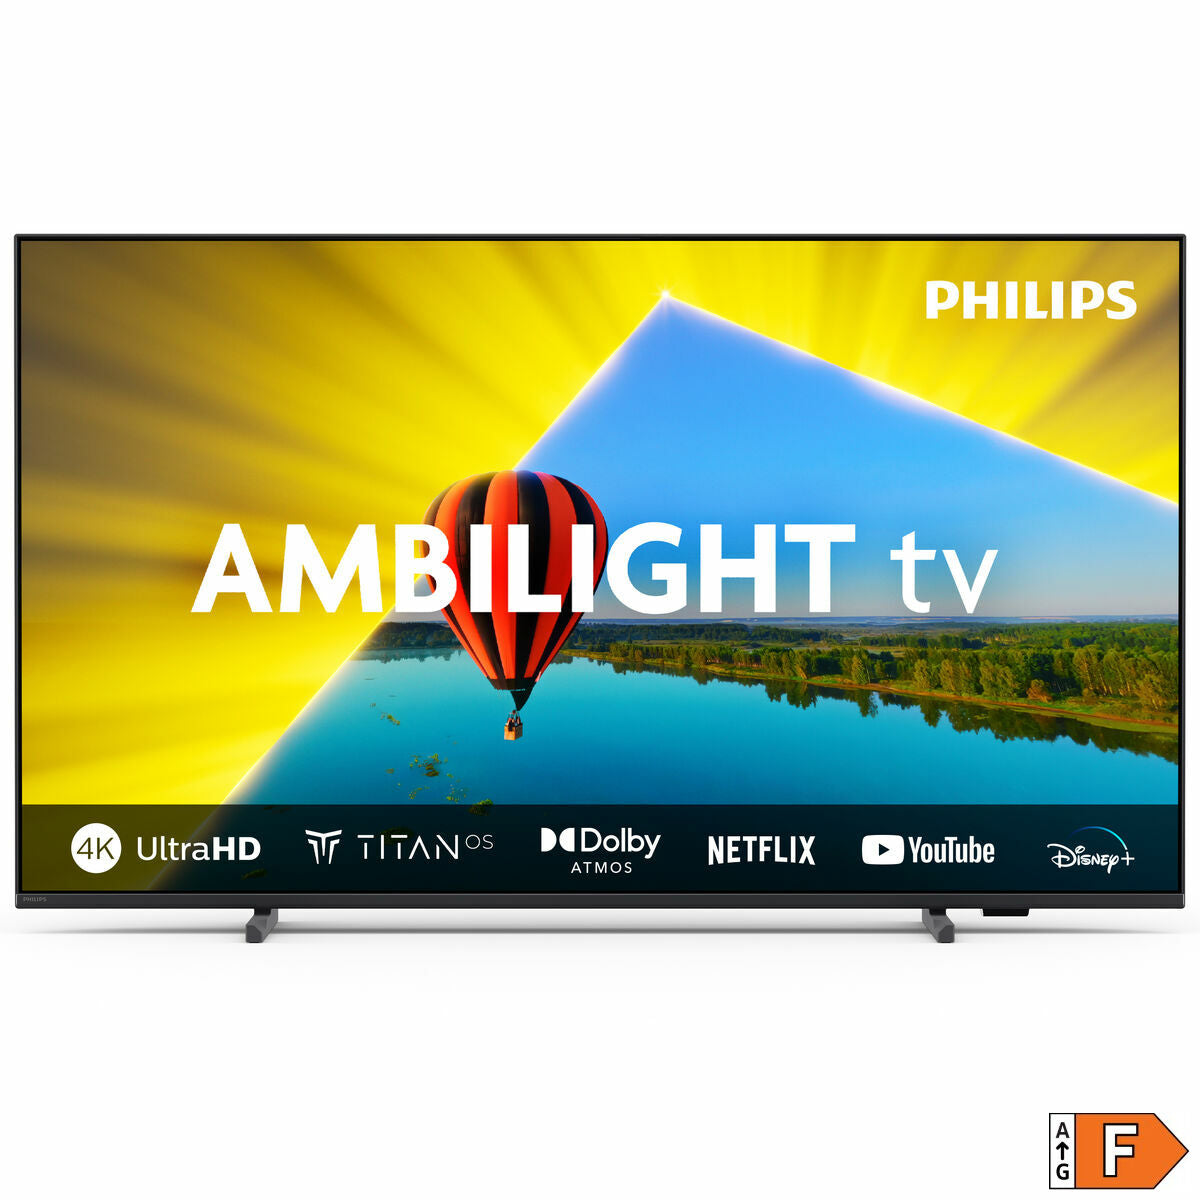 Smart TV Philips 50PUS8079 4K Ultra HD 50" LED, Philips, Electronics, TV, Video and home cinema, smart-tv-philips-50pus8079-4k-ultra-hd-50-led, Brand_Philips, category-reference-2609, category-reference-2625, category-reference-2931, category-reference-t-18805, category-reference-t-18827, category-reference-t-19653, cinema and television, Condition_NEW, entertainment, Price_400 - 500, RiotNook